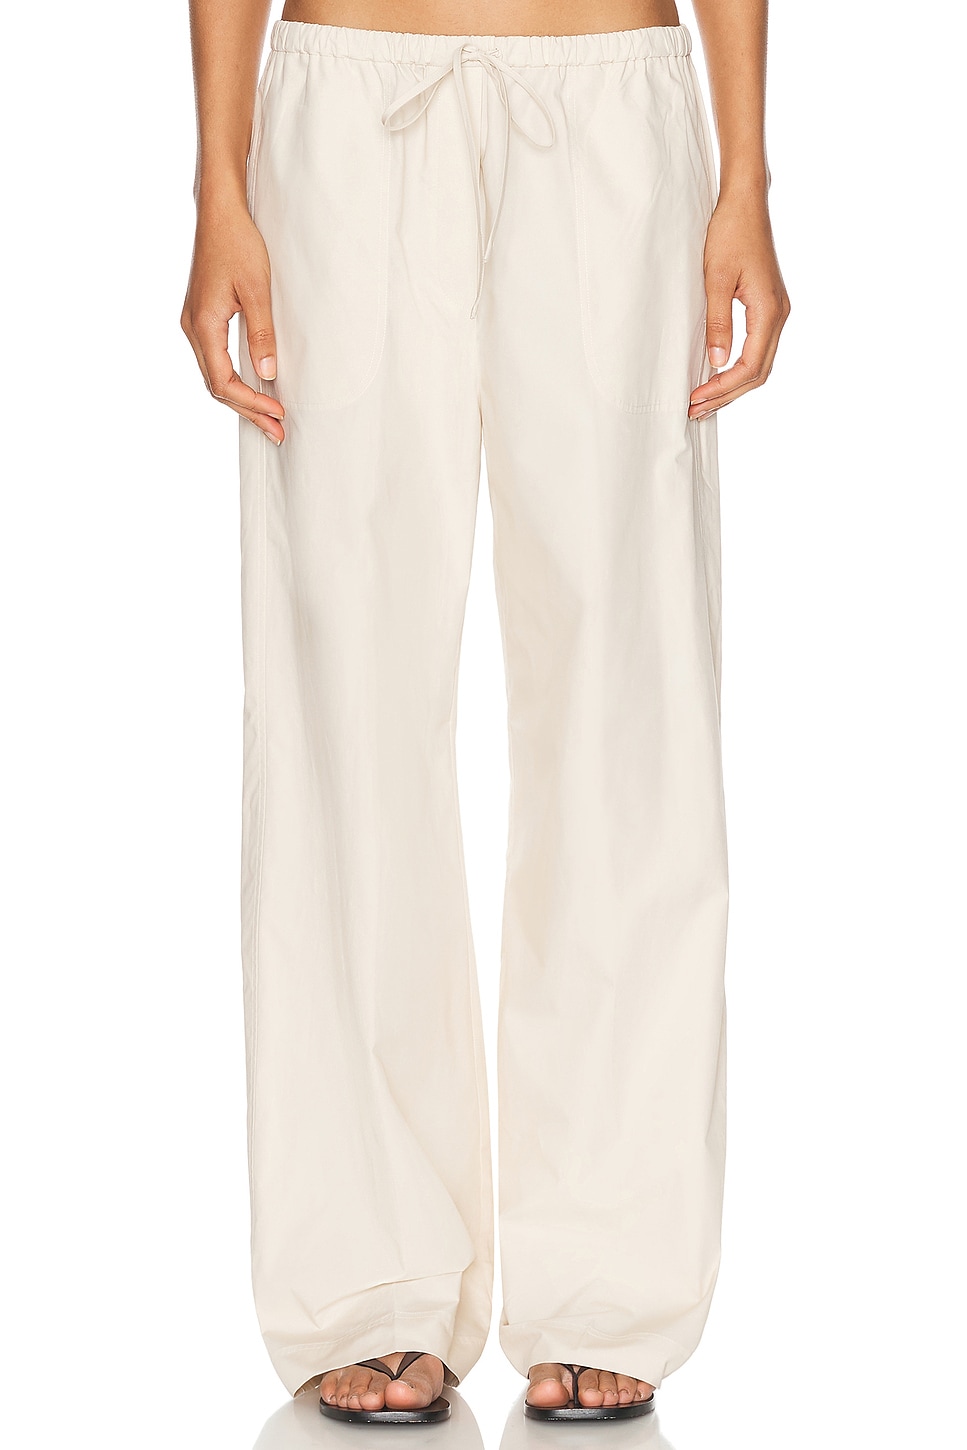 Image 1 of Toteme Cotton Drawstring Trousers in Stone